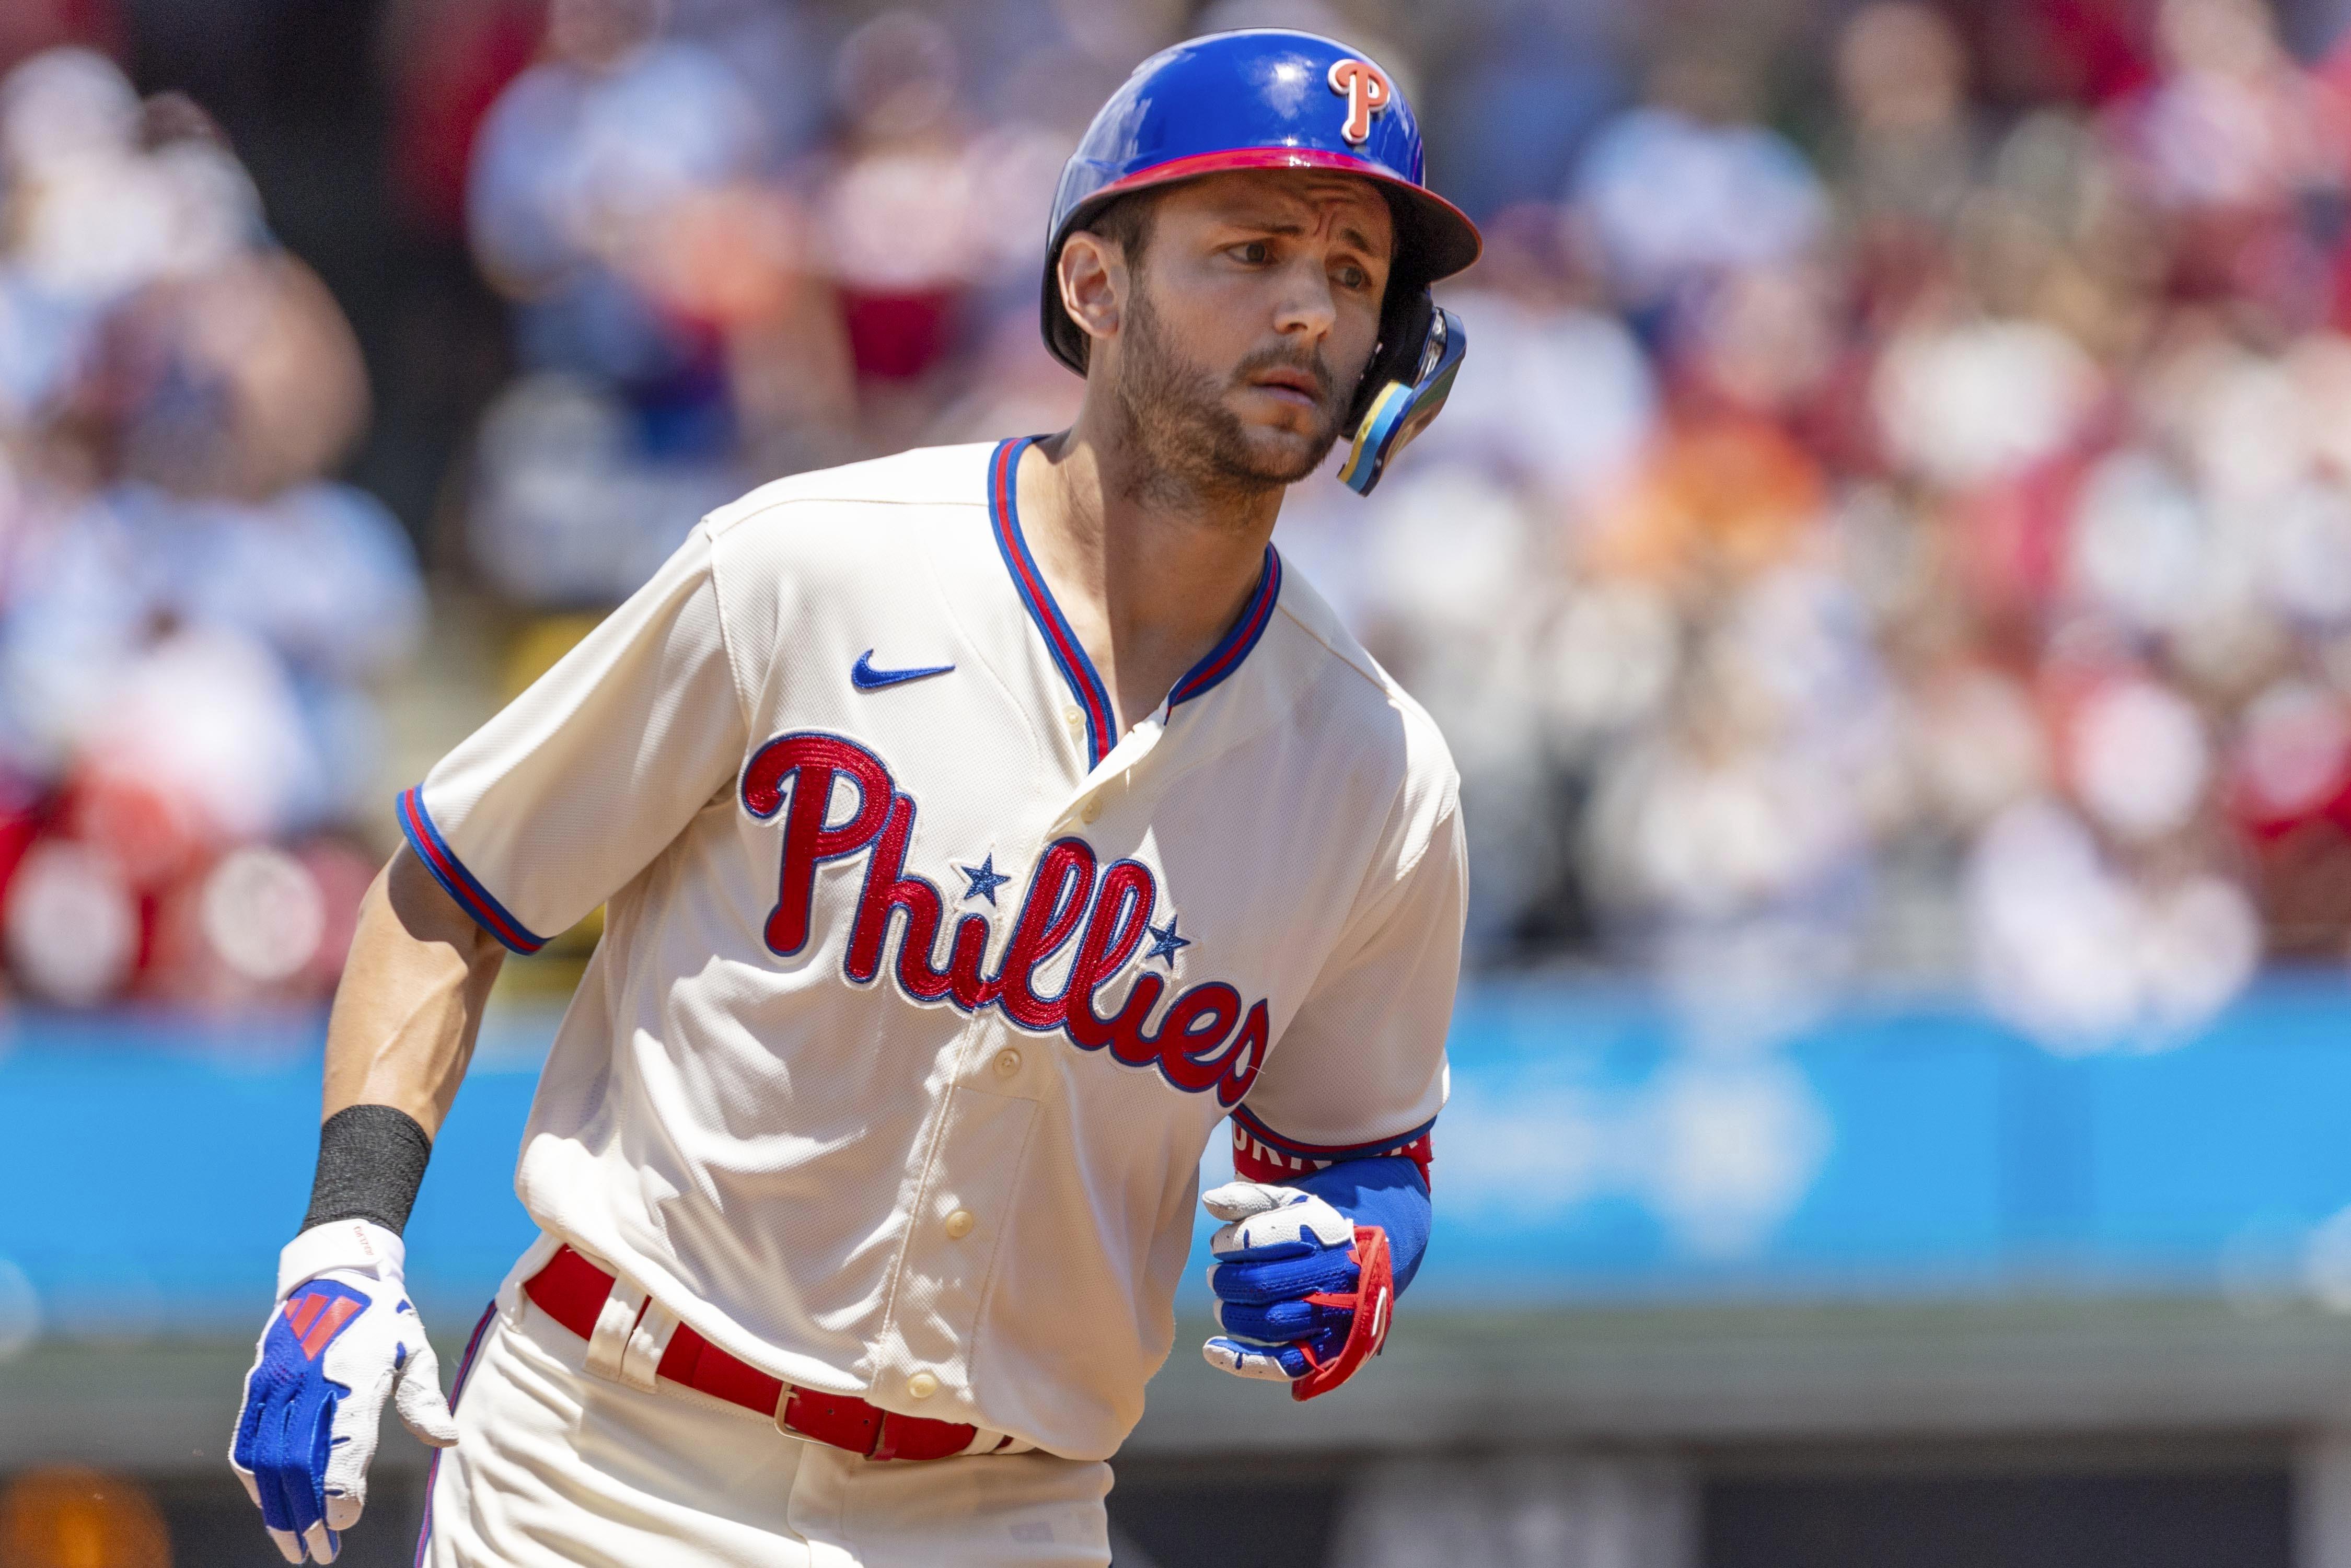 Alec Bohm delivers another key hit in Phillies win over Mets